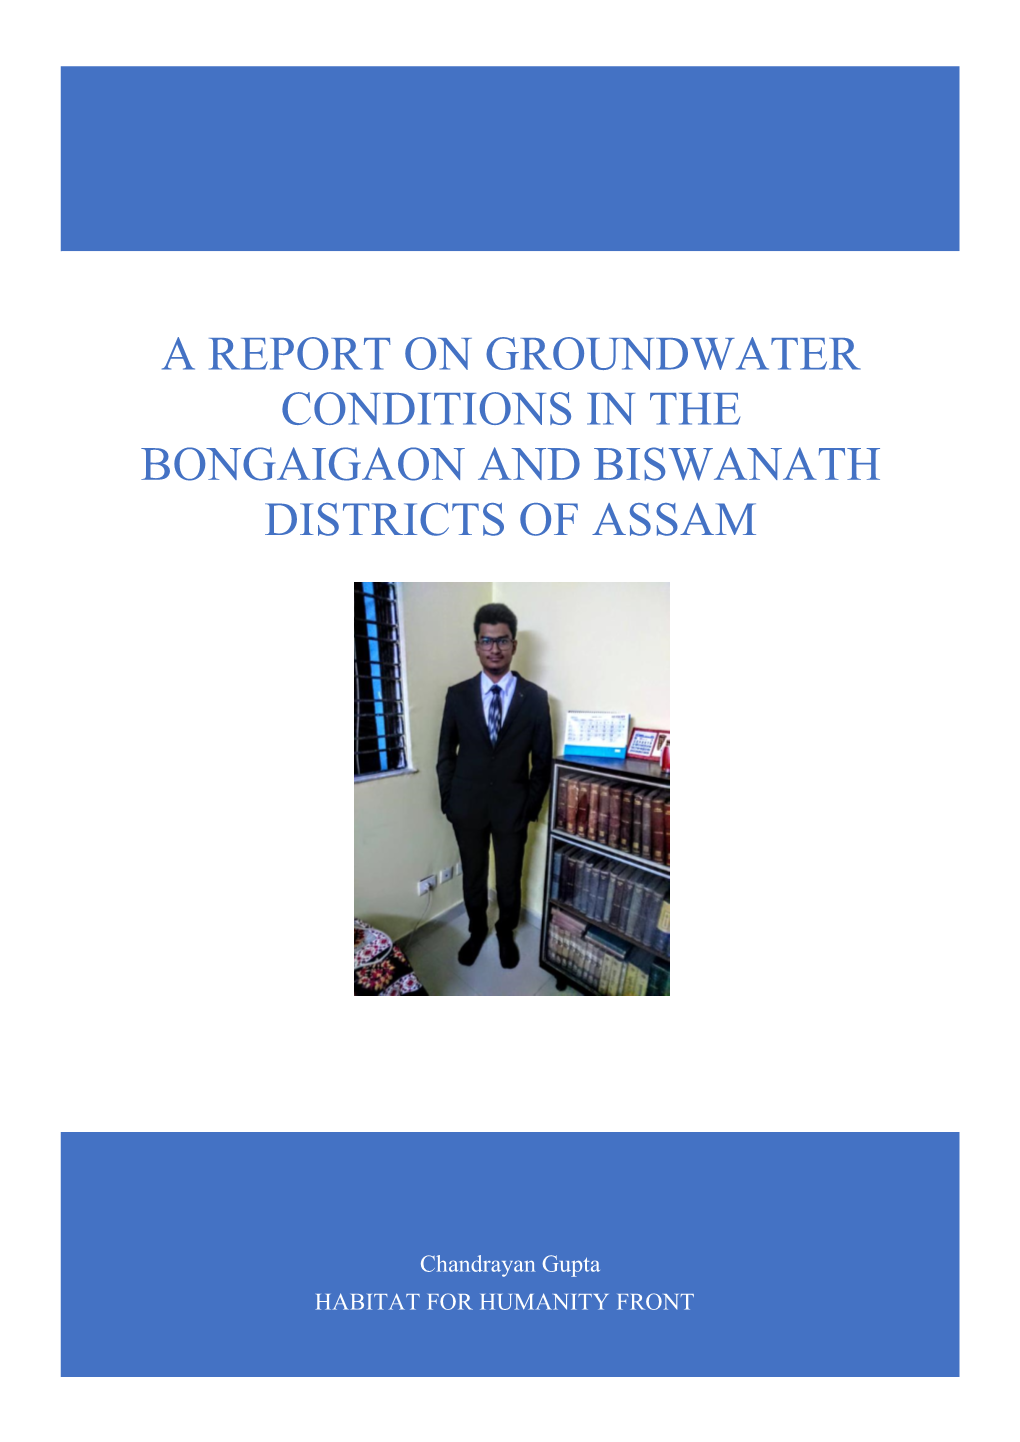 A Report on Groundwater Conditions in the Bongaigaon and Biswanath Districts of Assam